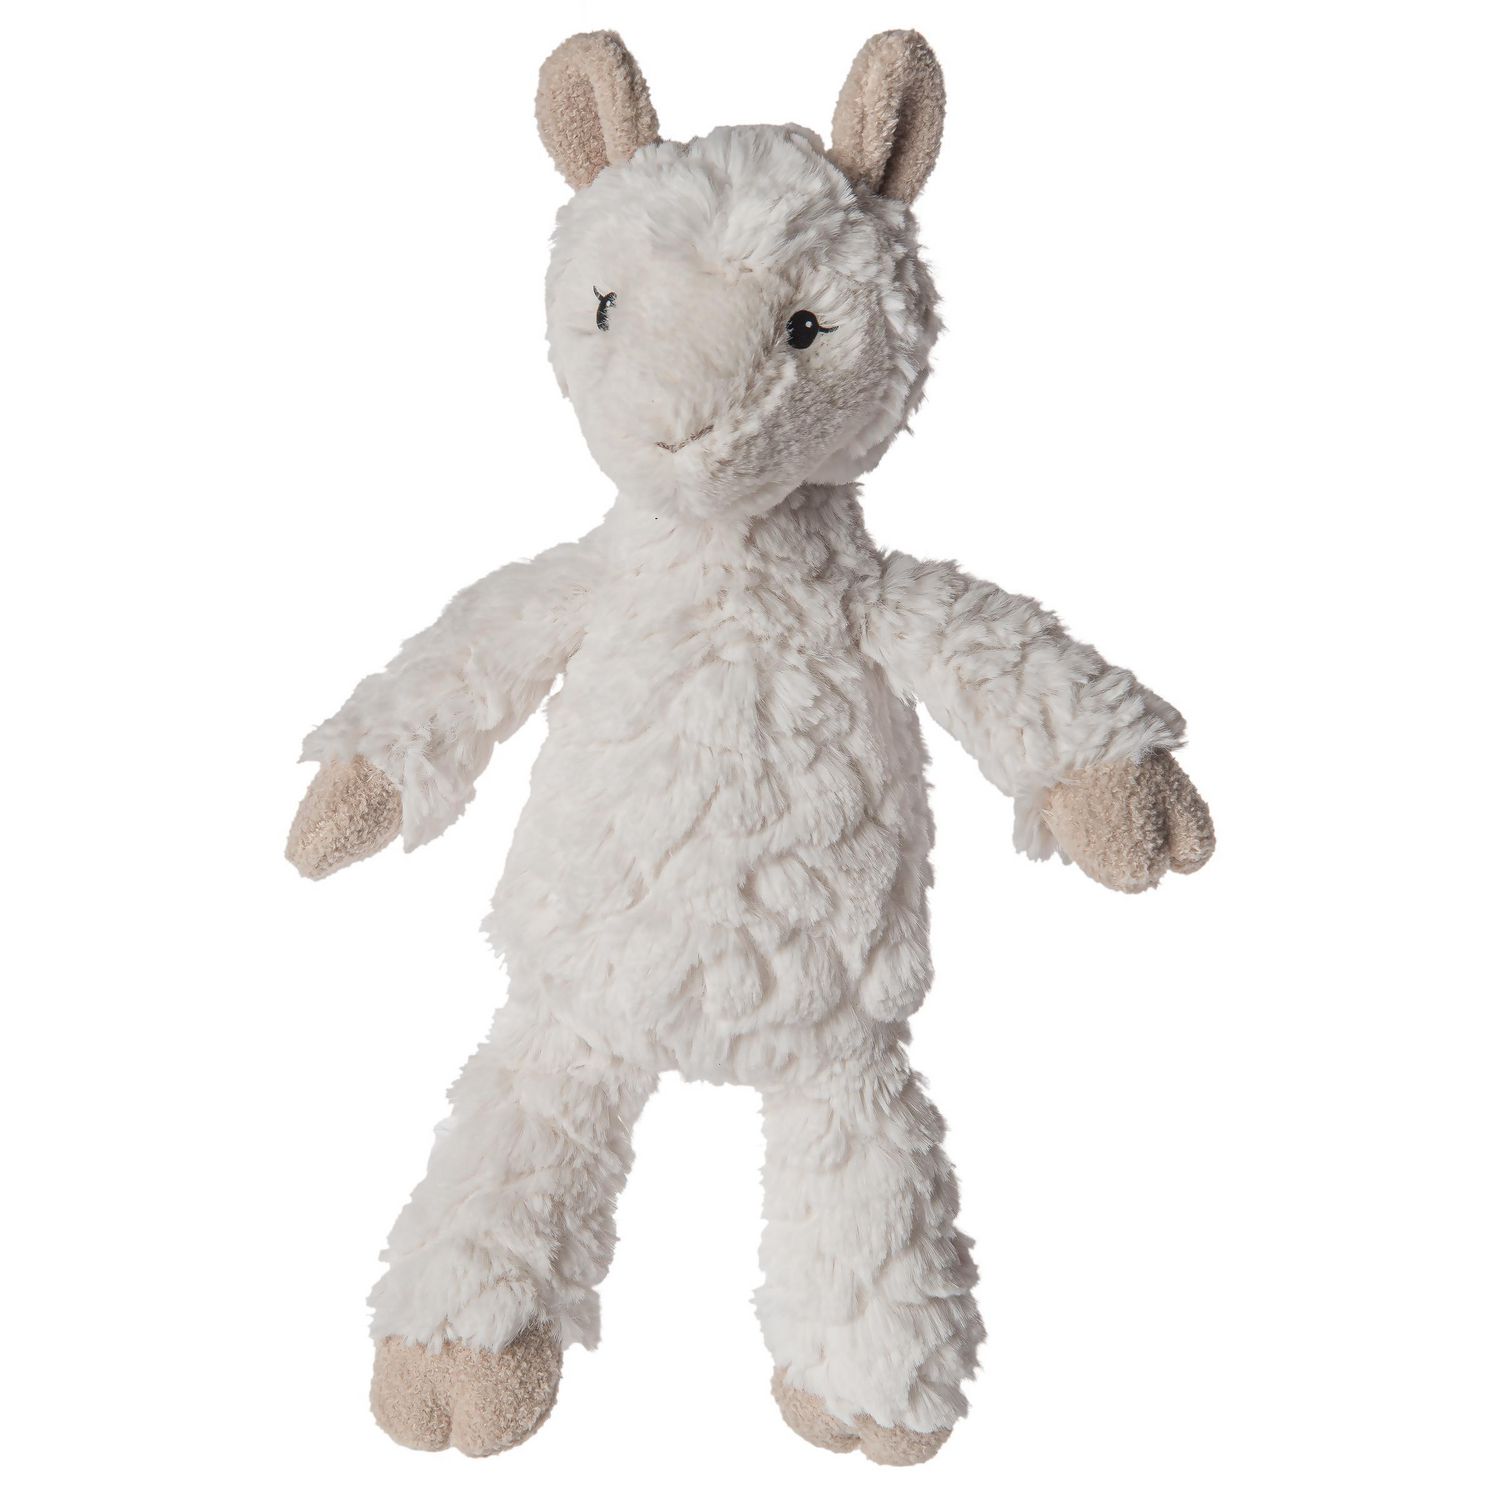 washable soft toys for babies